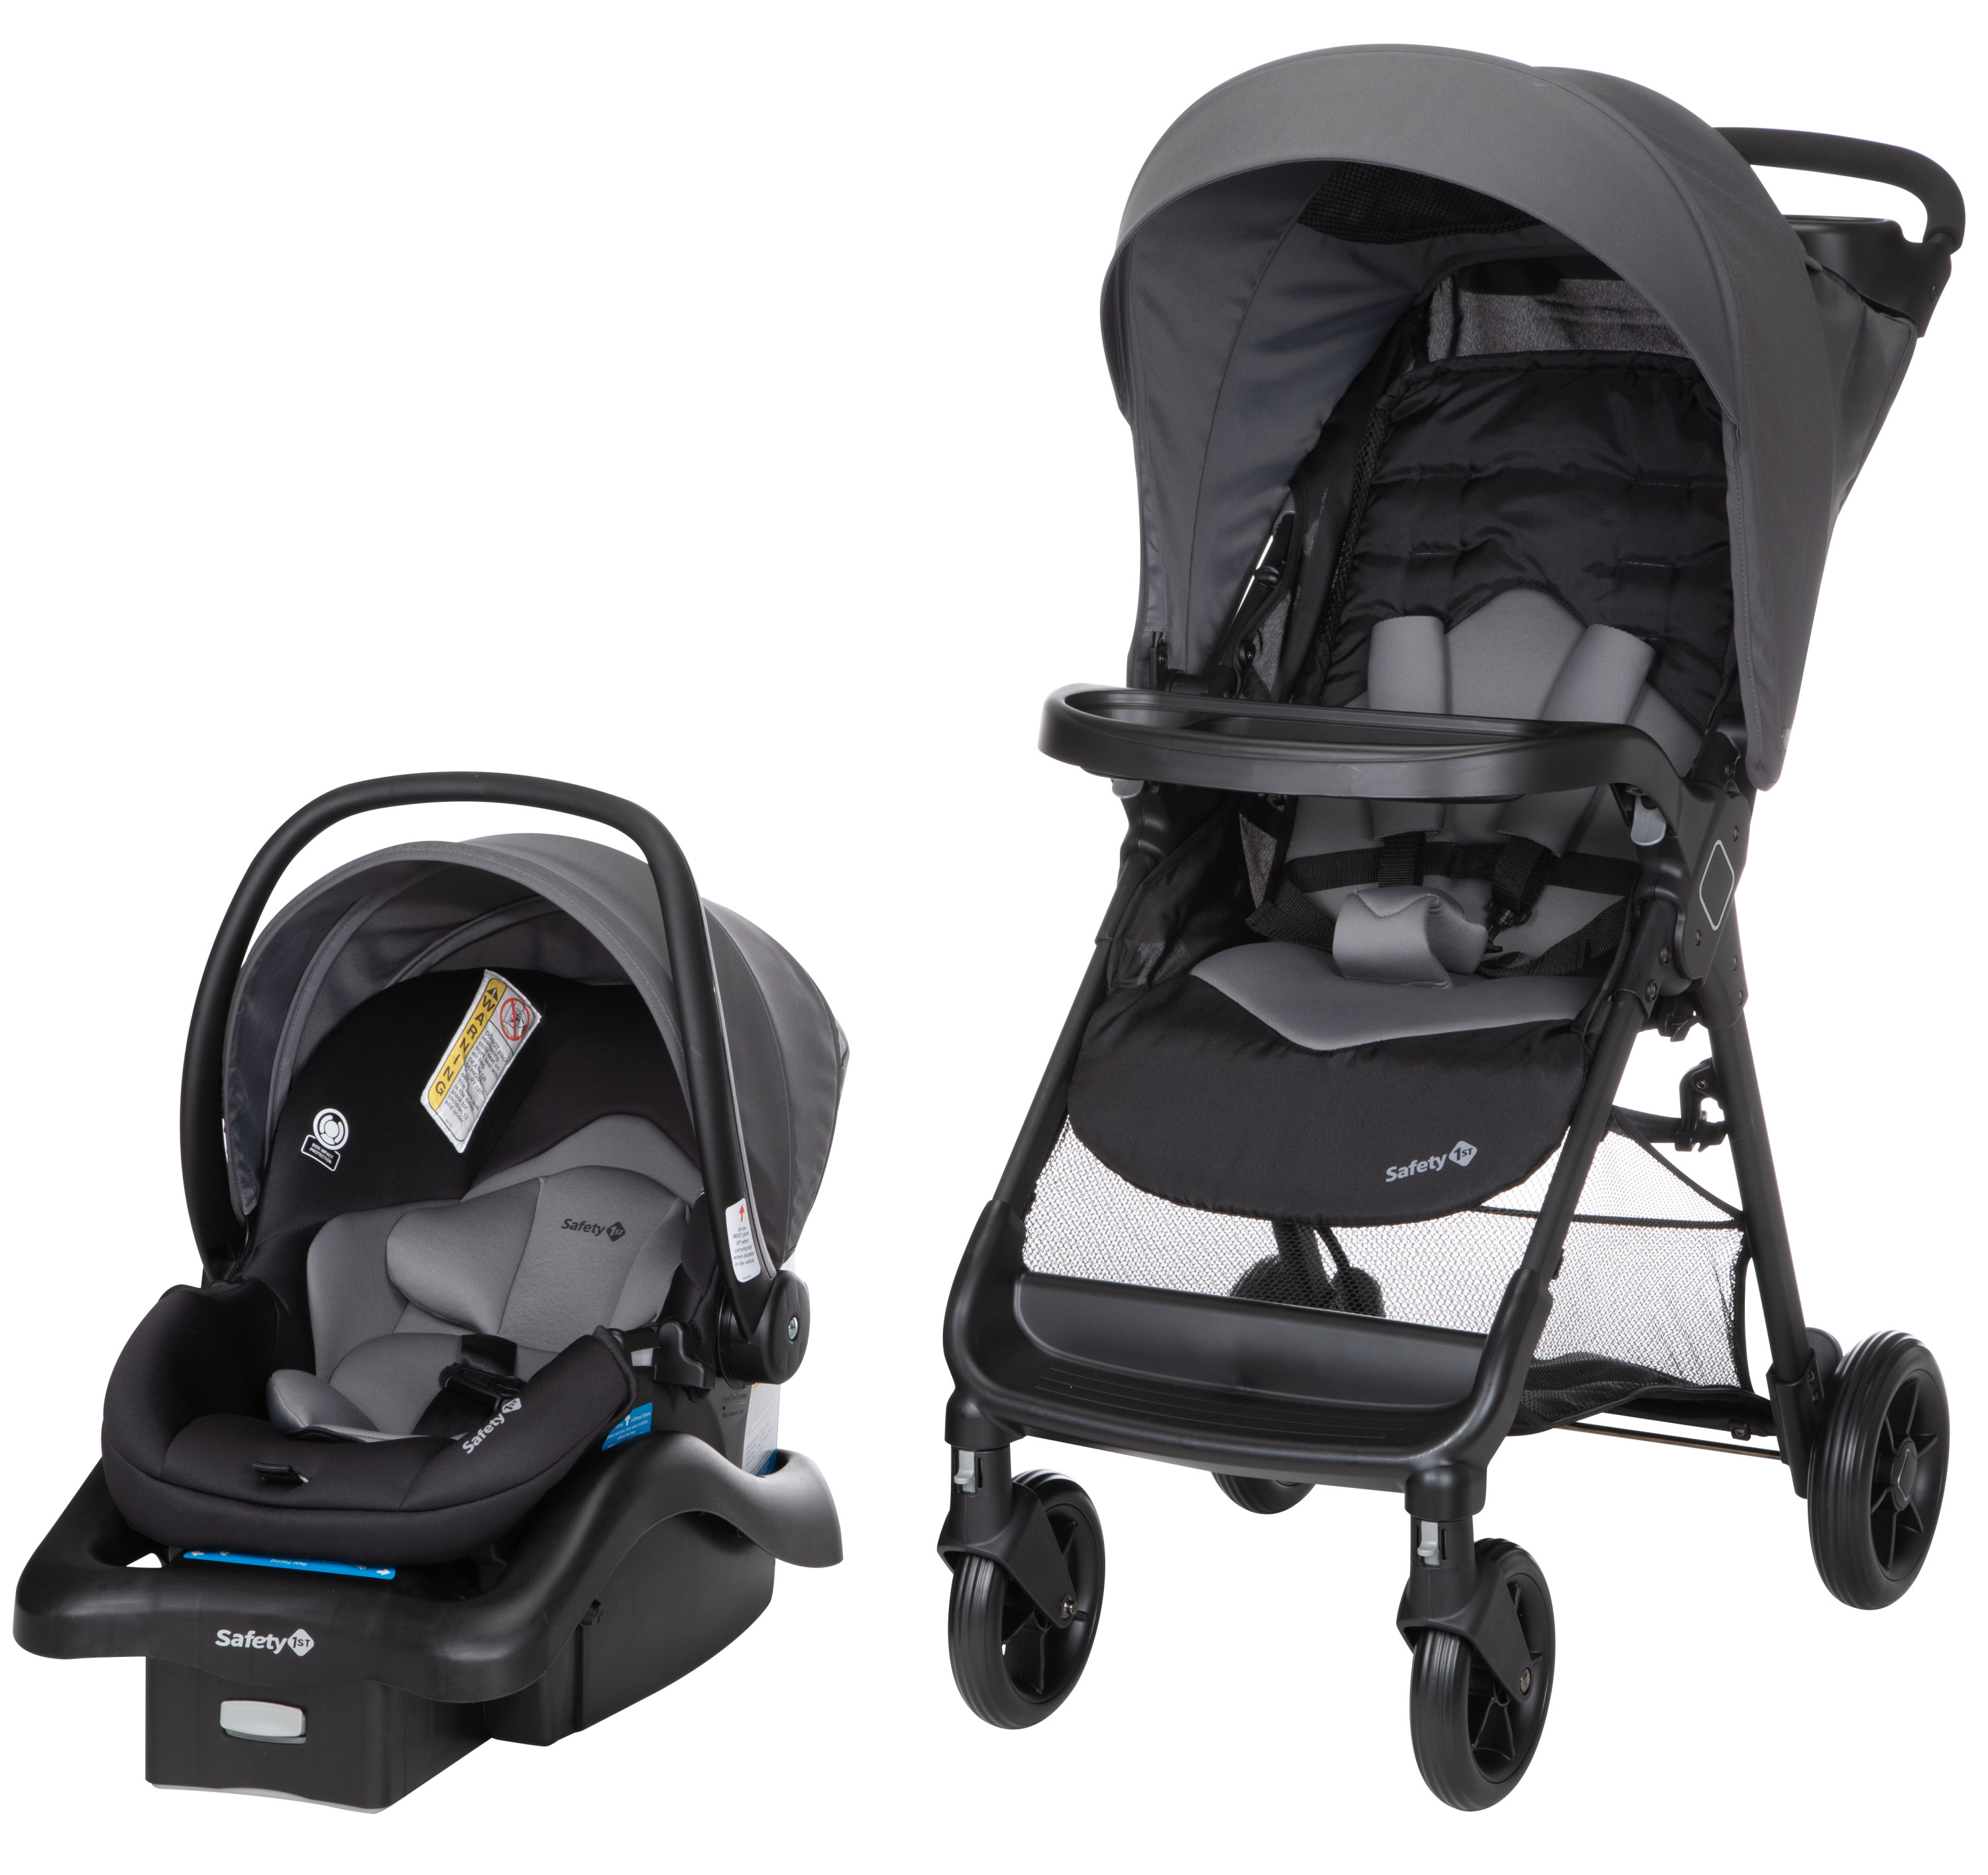 Safety 1ˢᵗ Smooth Ride Travel System Stroller and Infant Car Seat, Monument - image 1 of 28